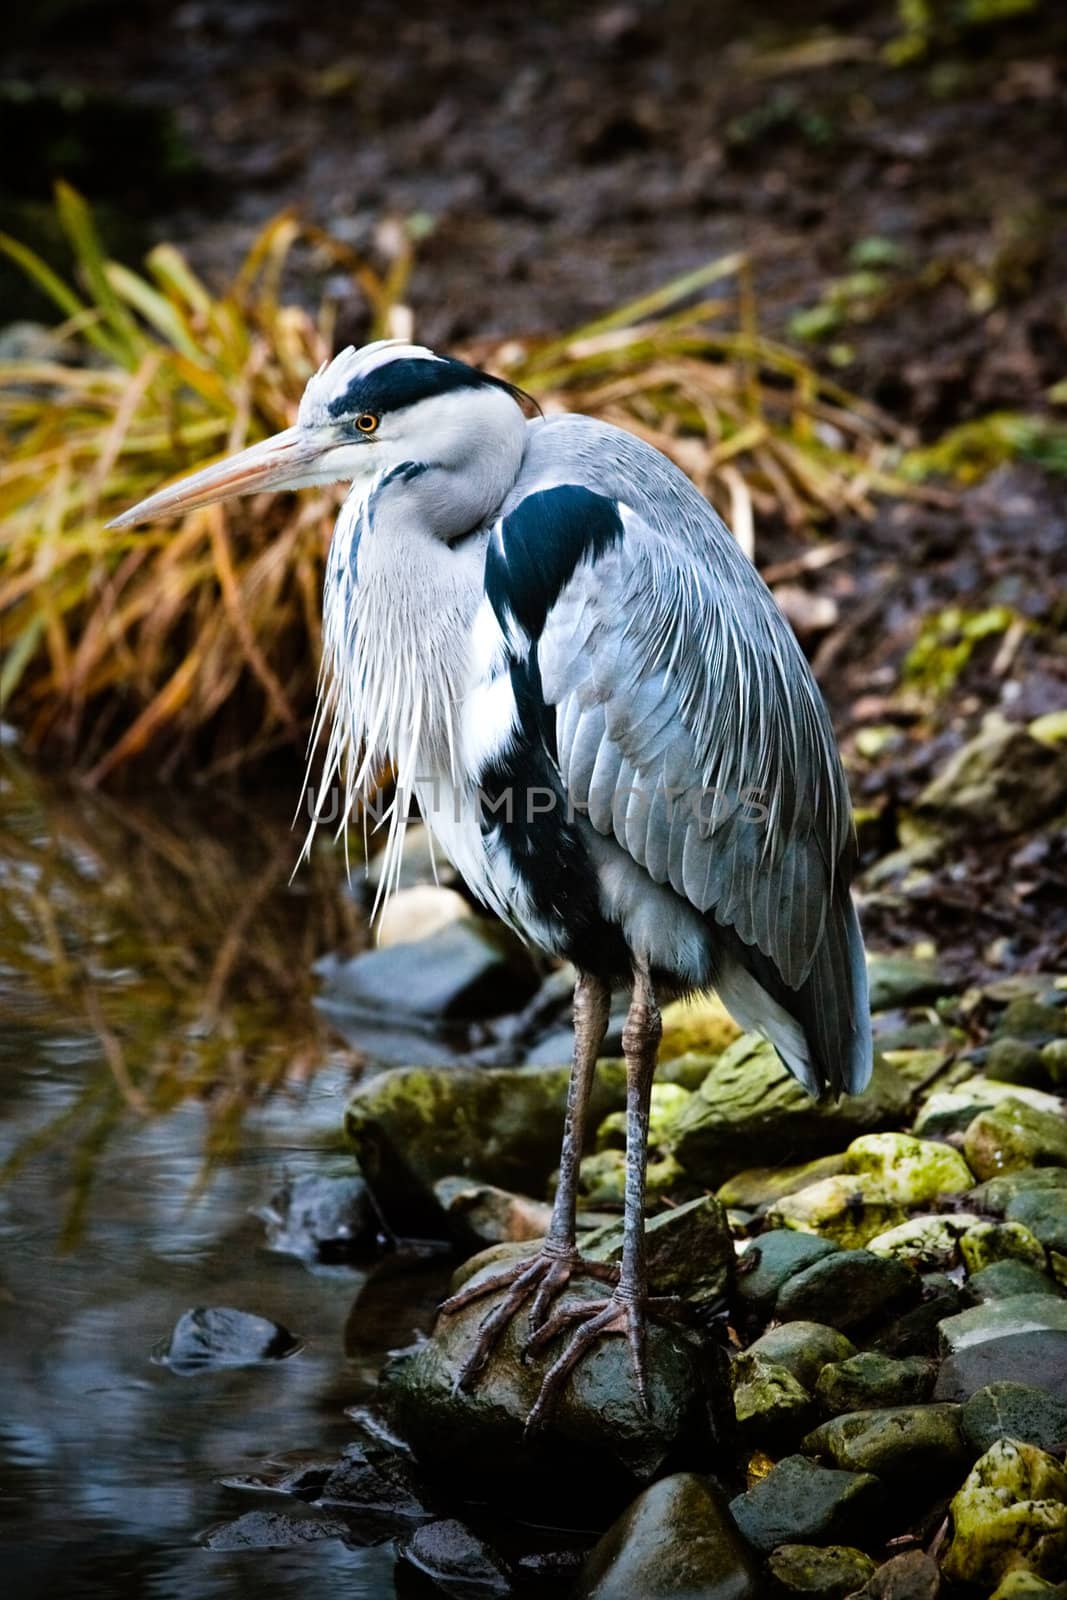 Grey heron at the waterside by Colette